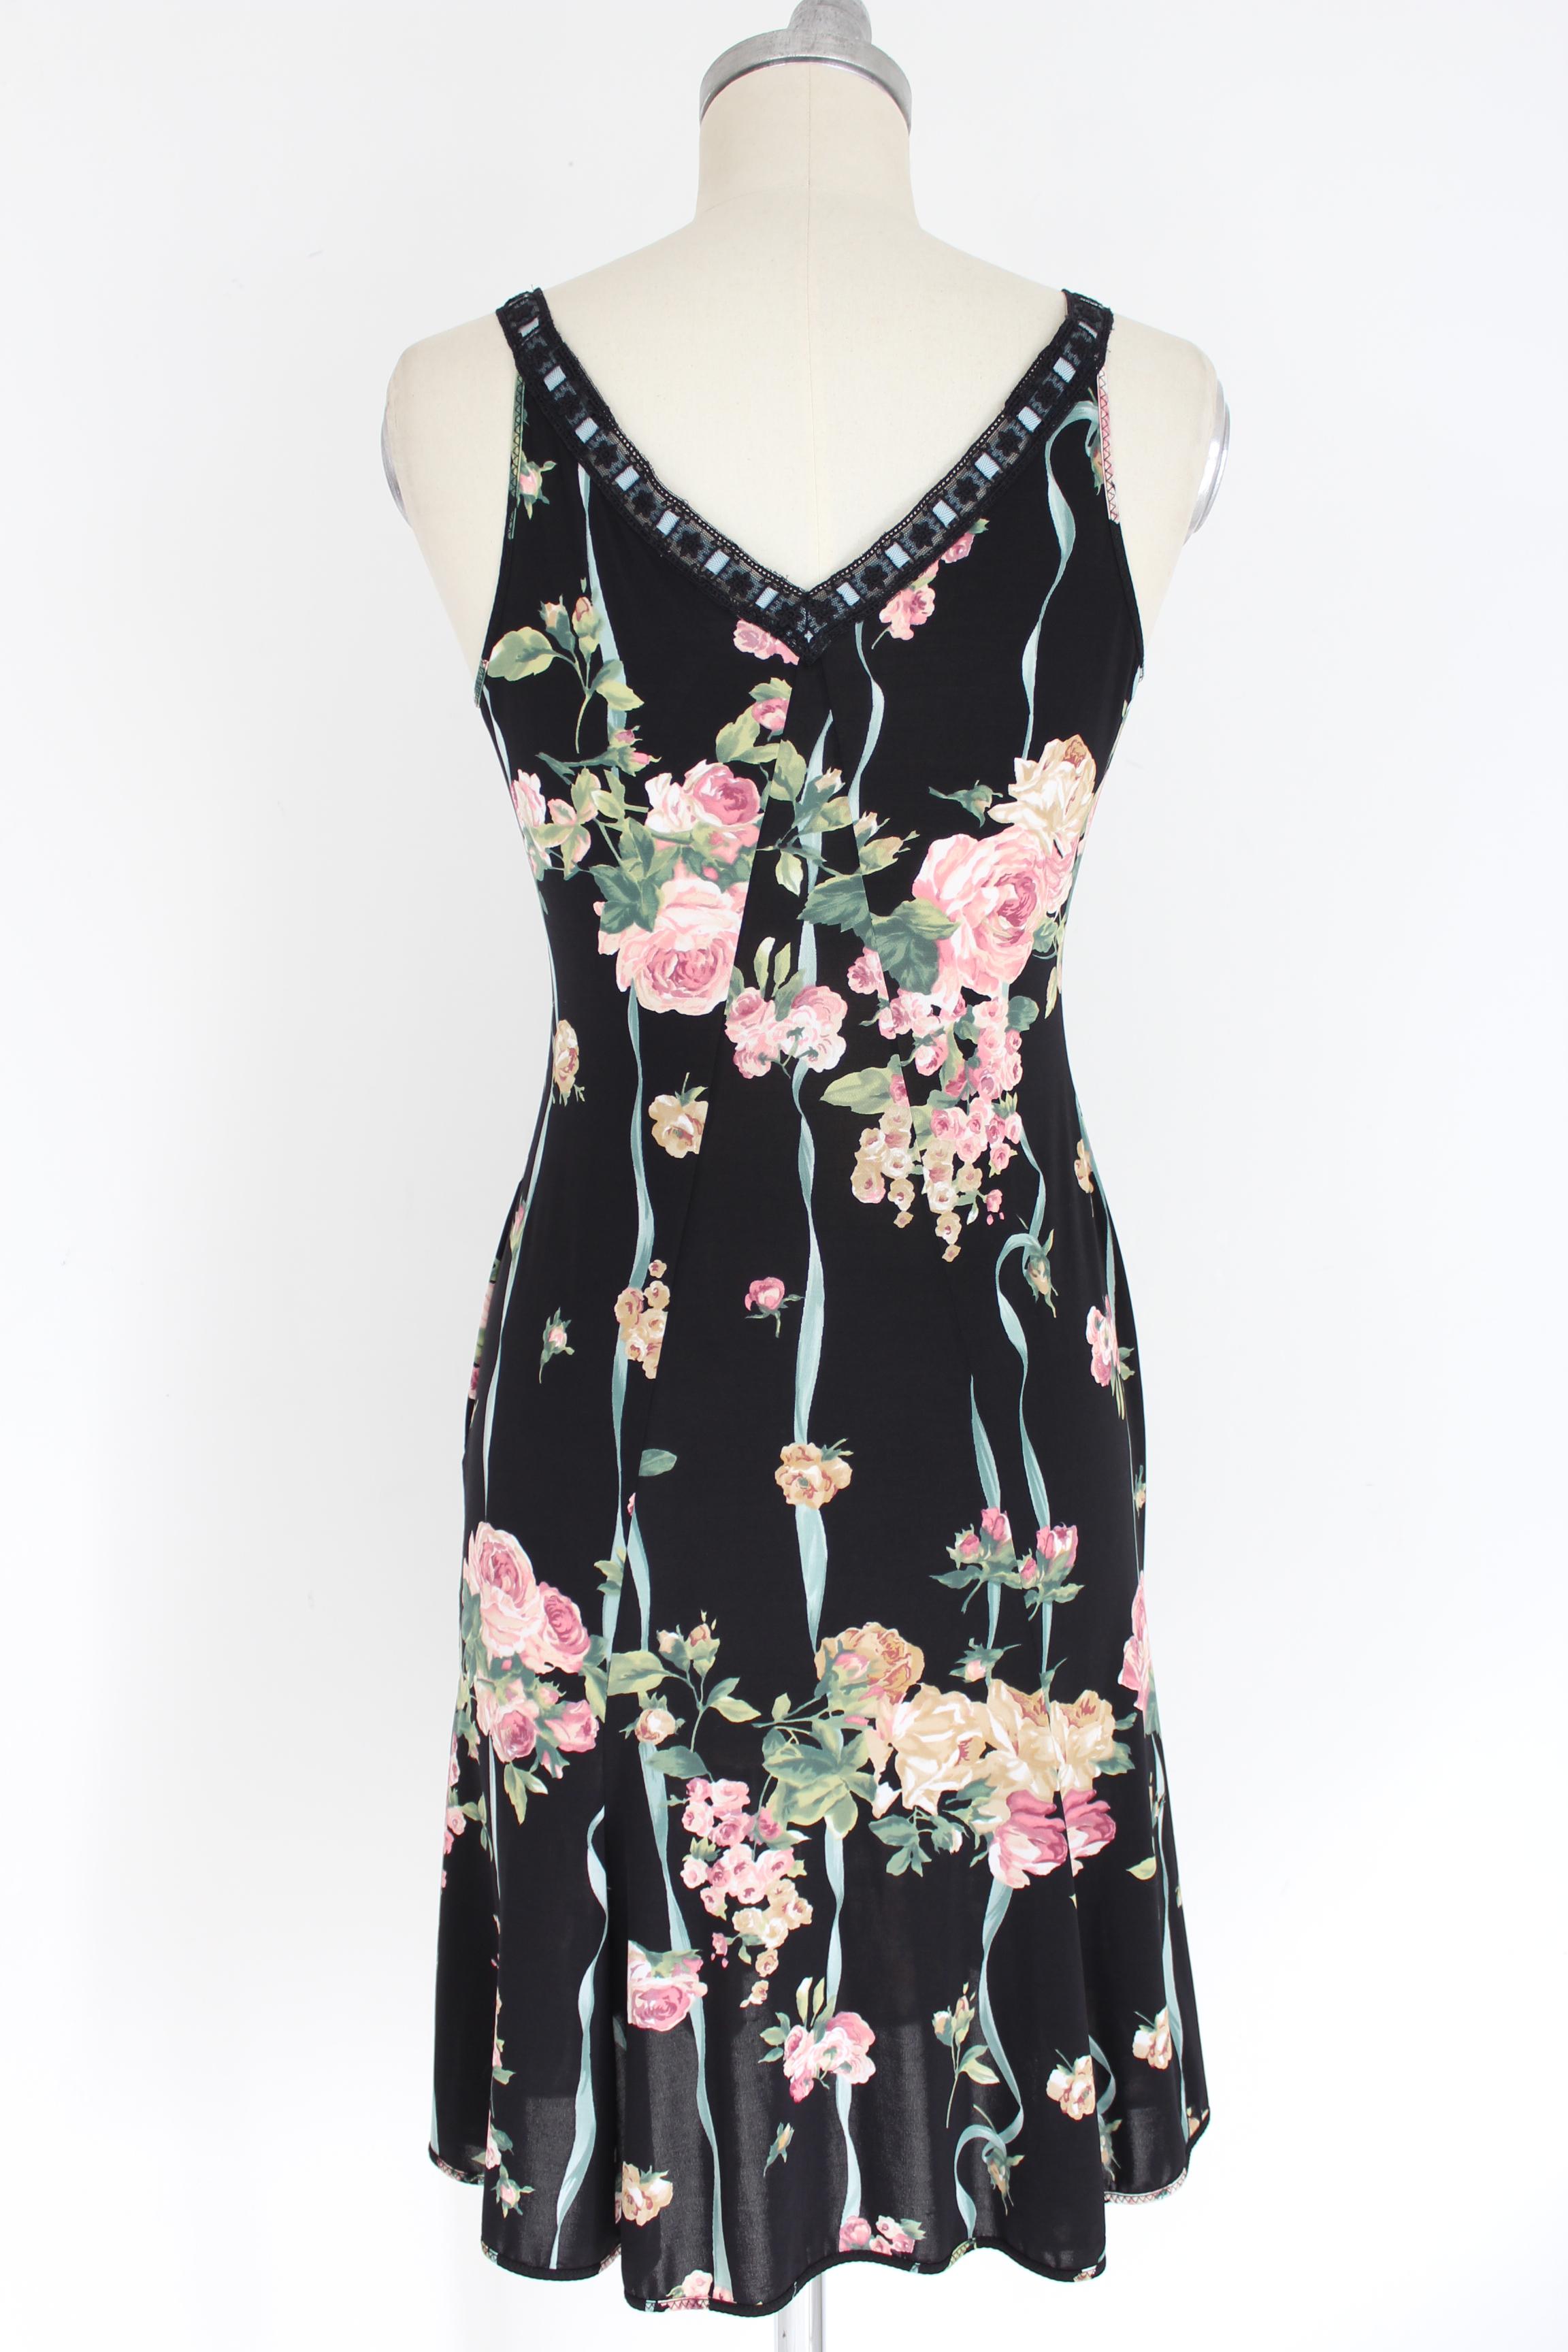 Blumarine 90s vintage woman dress. Dress tight at the waist and flared on the length, sleeveless, V-neck. Black and pink color with floral designs. 90% polyamide 10% spandex. Made in Italy. Excellent vintage condition.

Size: 46 It 12 Us 14